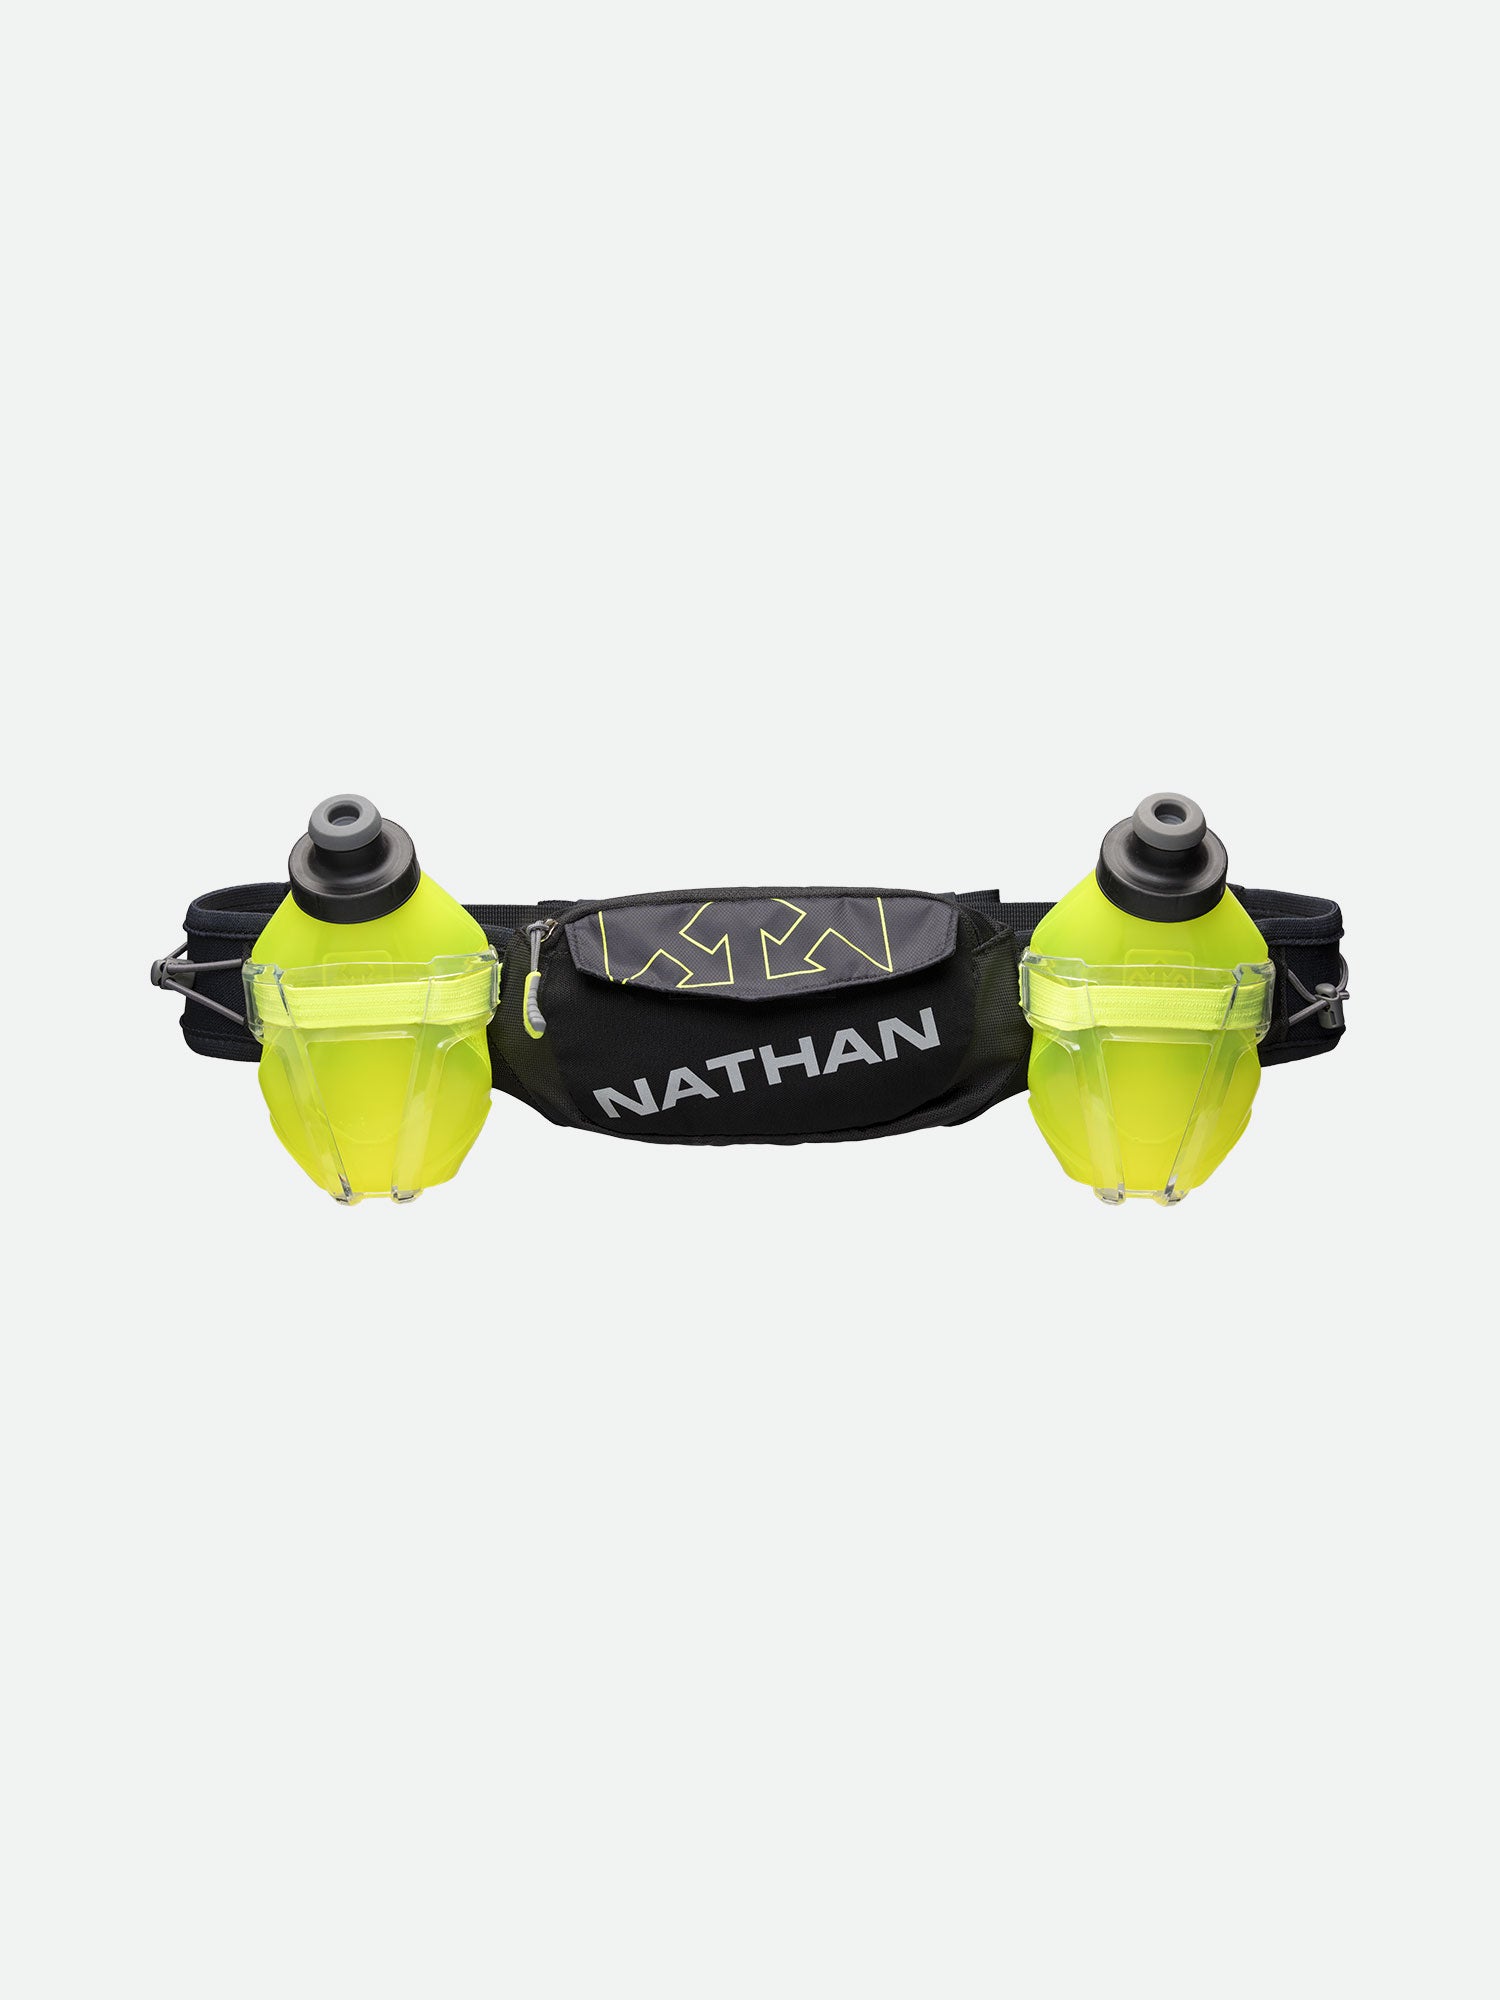  Nathan NS4851-0339-00 Speed Draw Plus Insulated